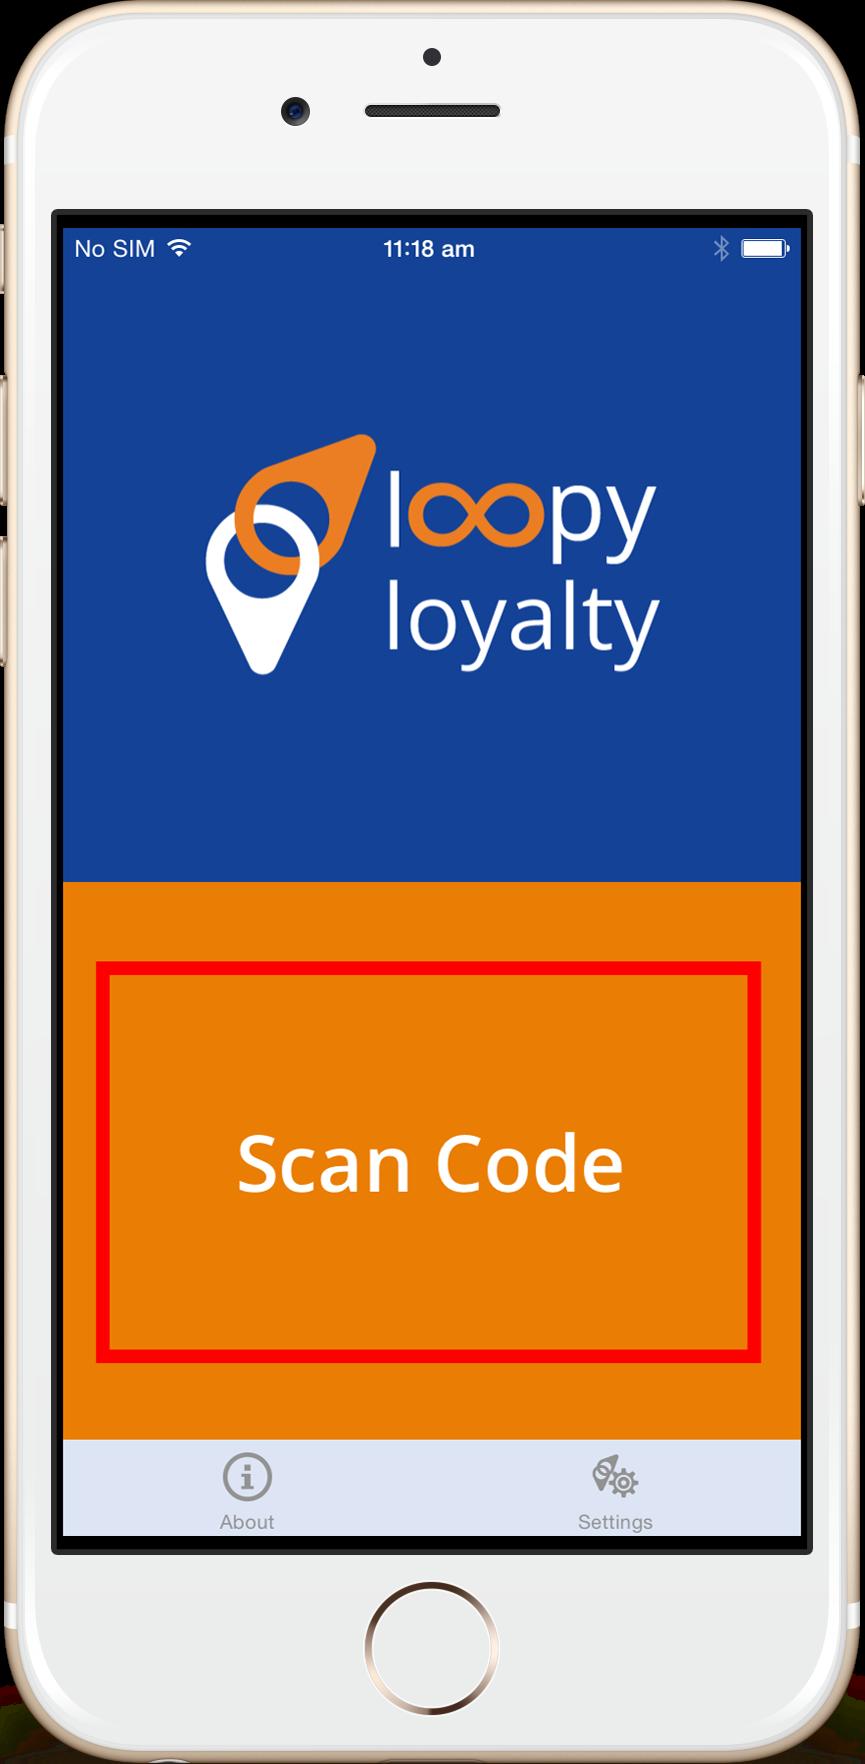 Go to Settings. Enter your Loopy Loyalty Username and Password credentials to set up the app. Enter the same username and password that you used to log in to the dashboard.